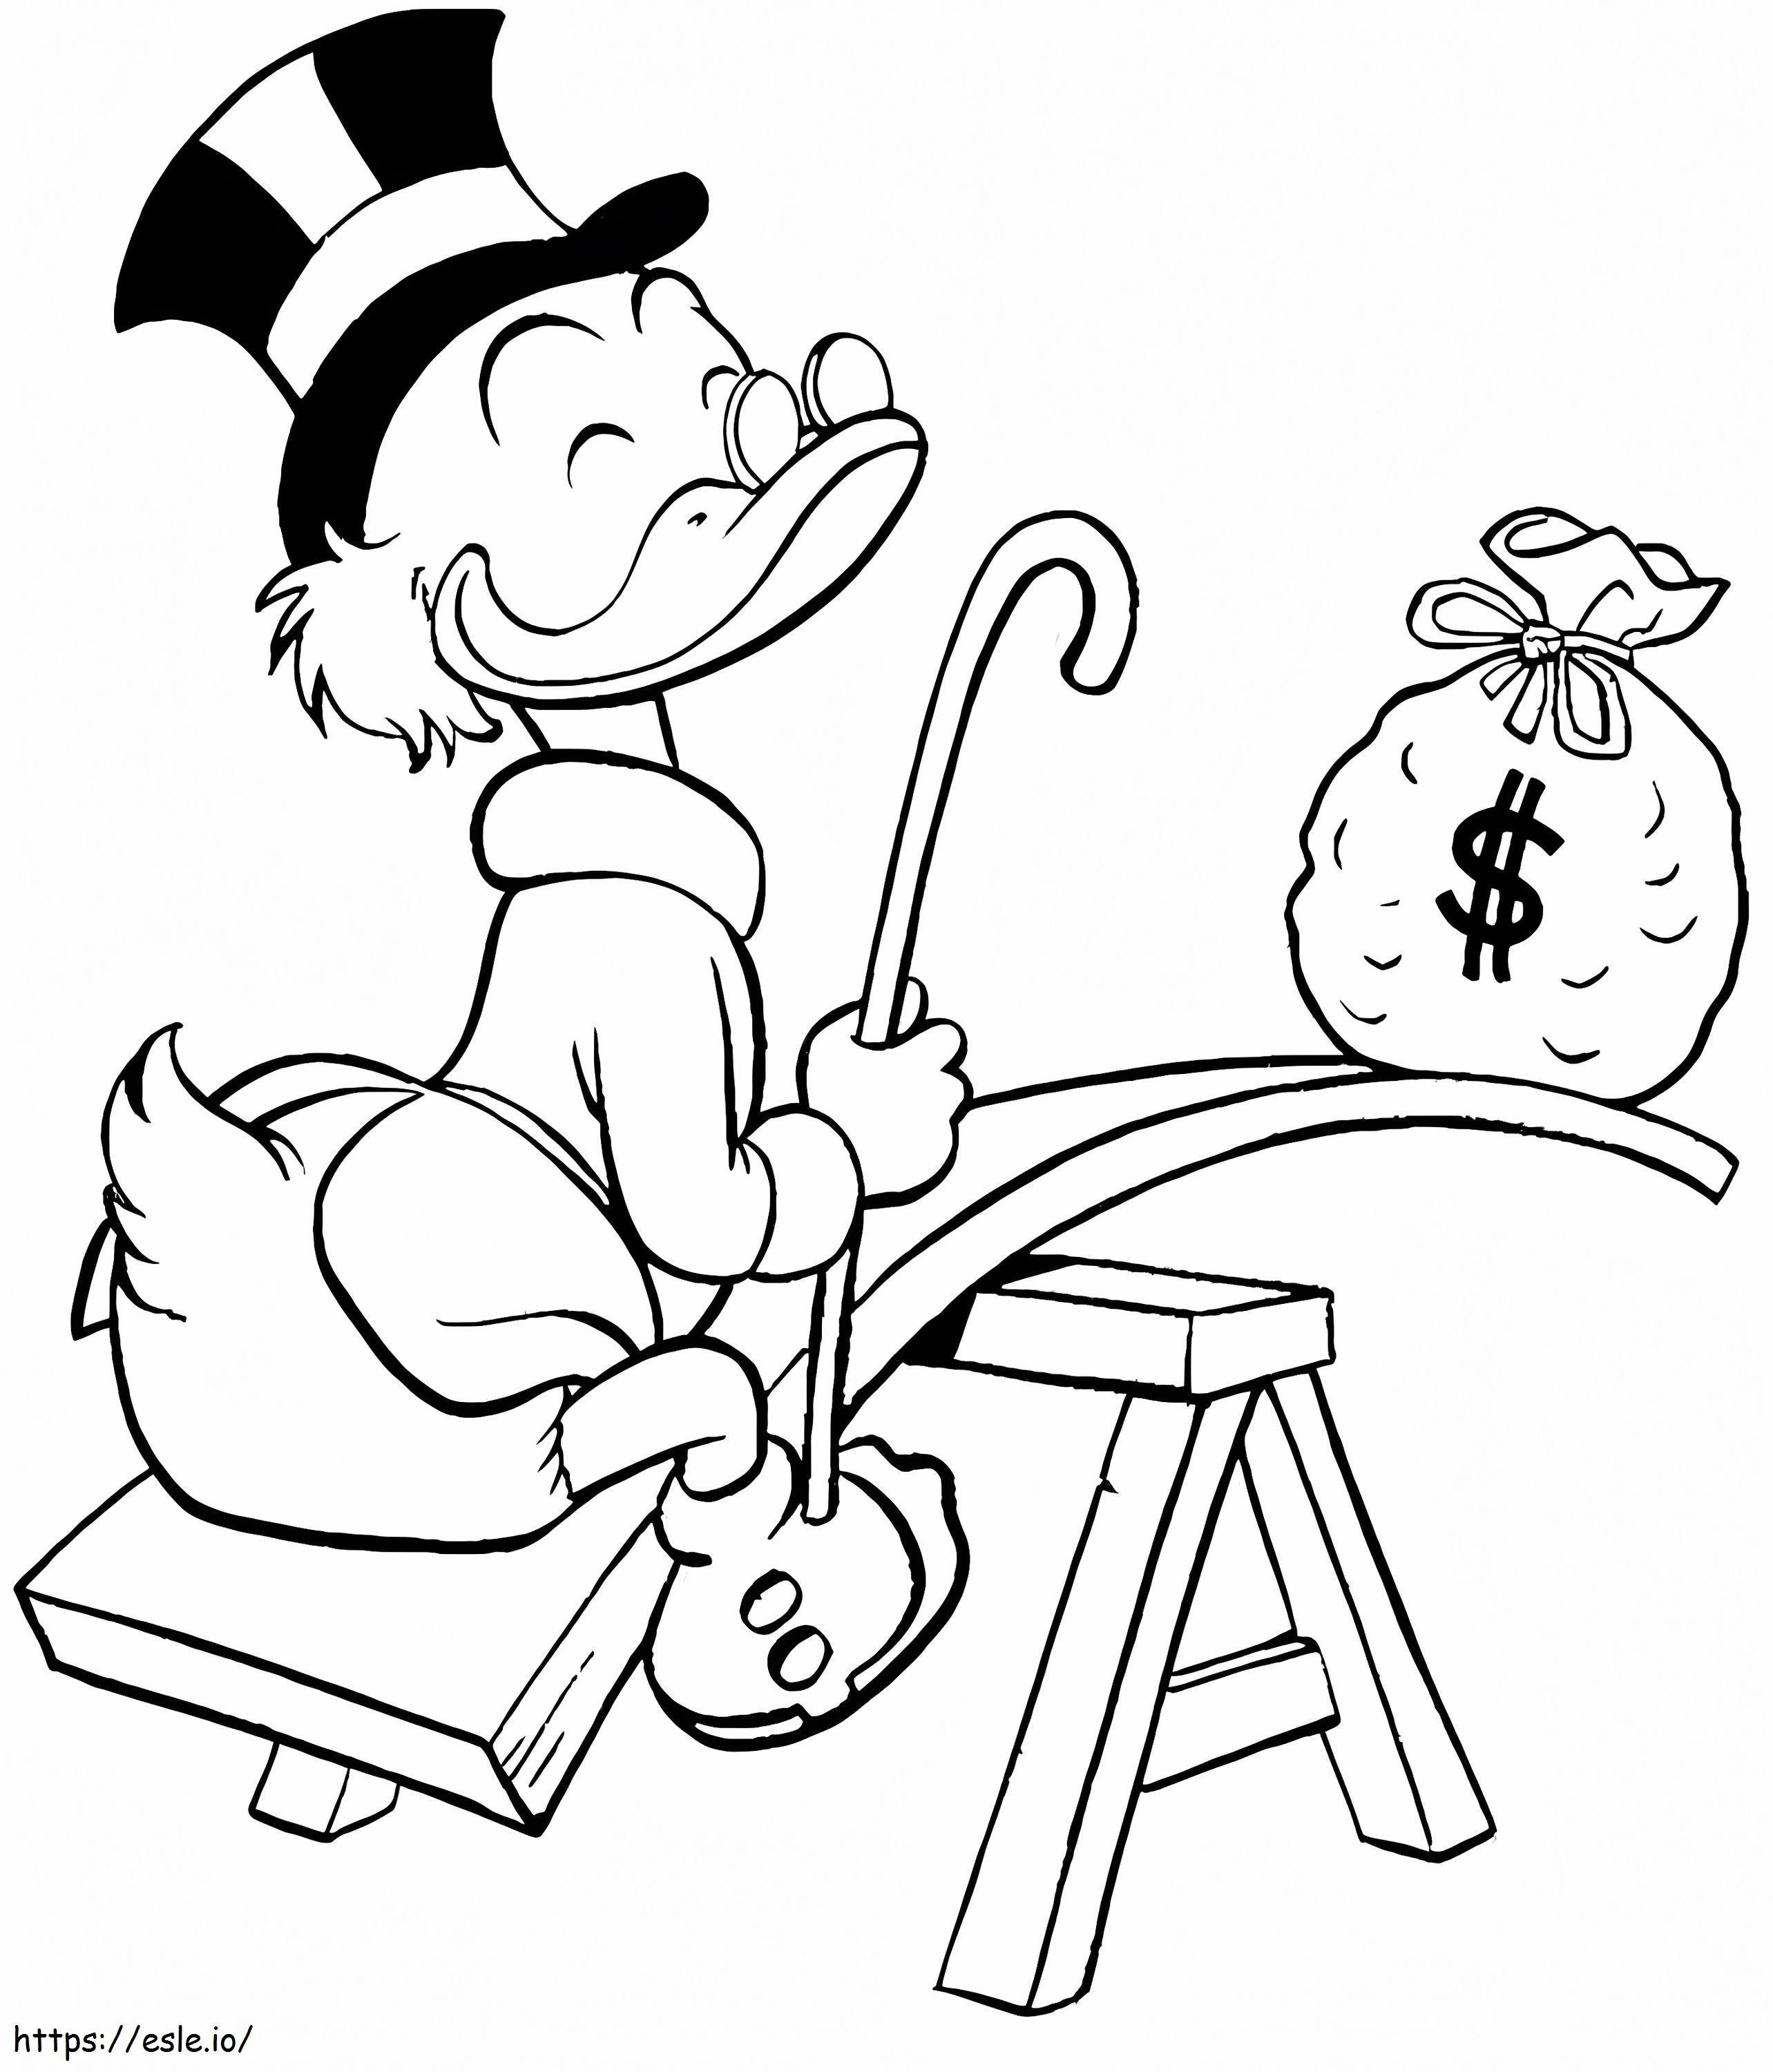 Scrooge McDuck With Money coloring page